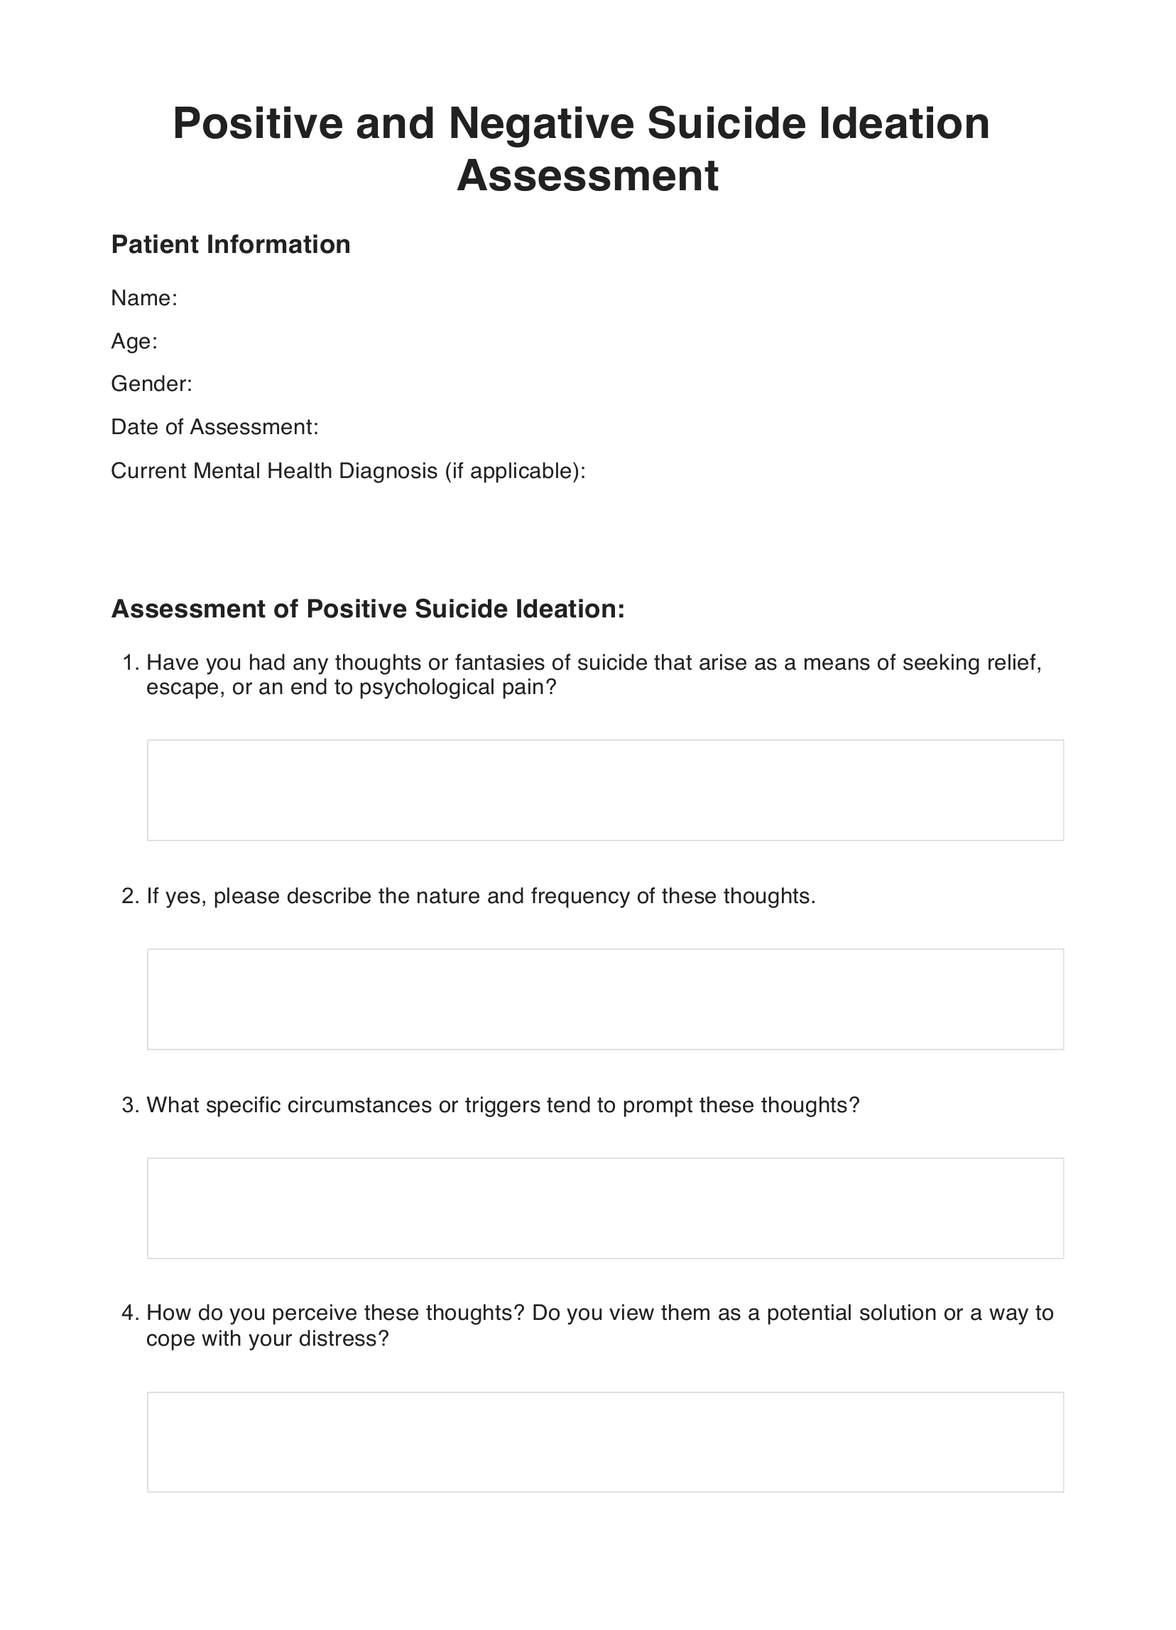 Positive and Negative Suicide Ideation PDF Example